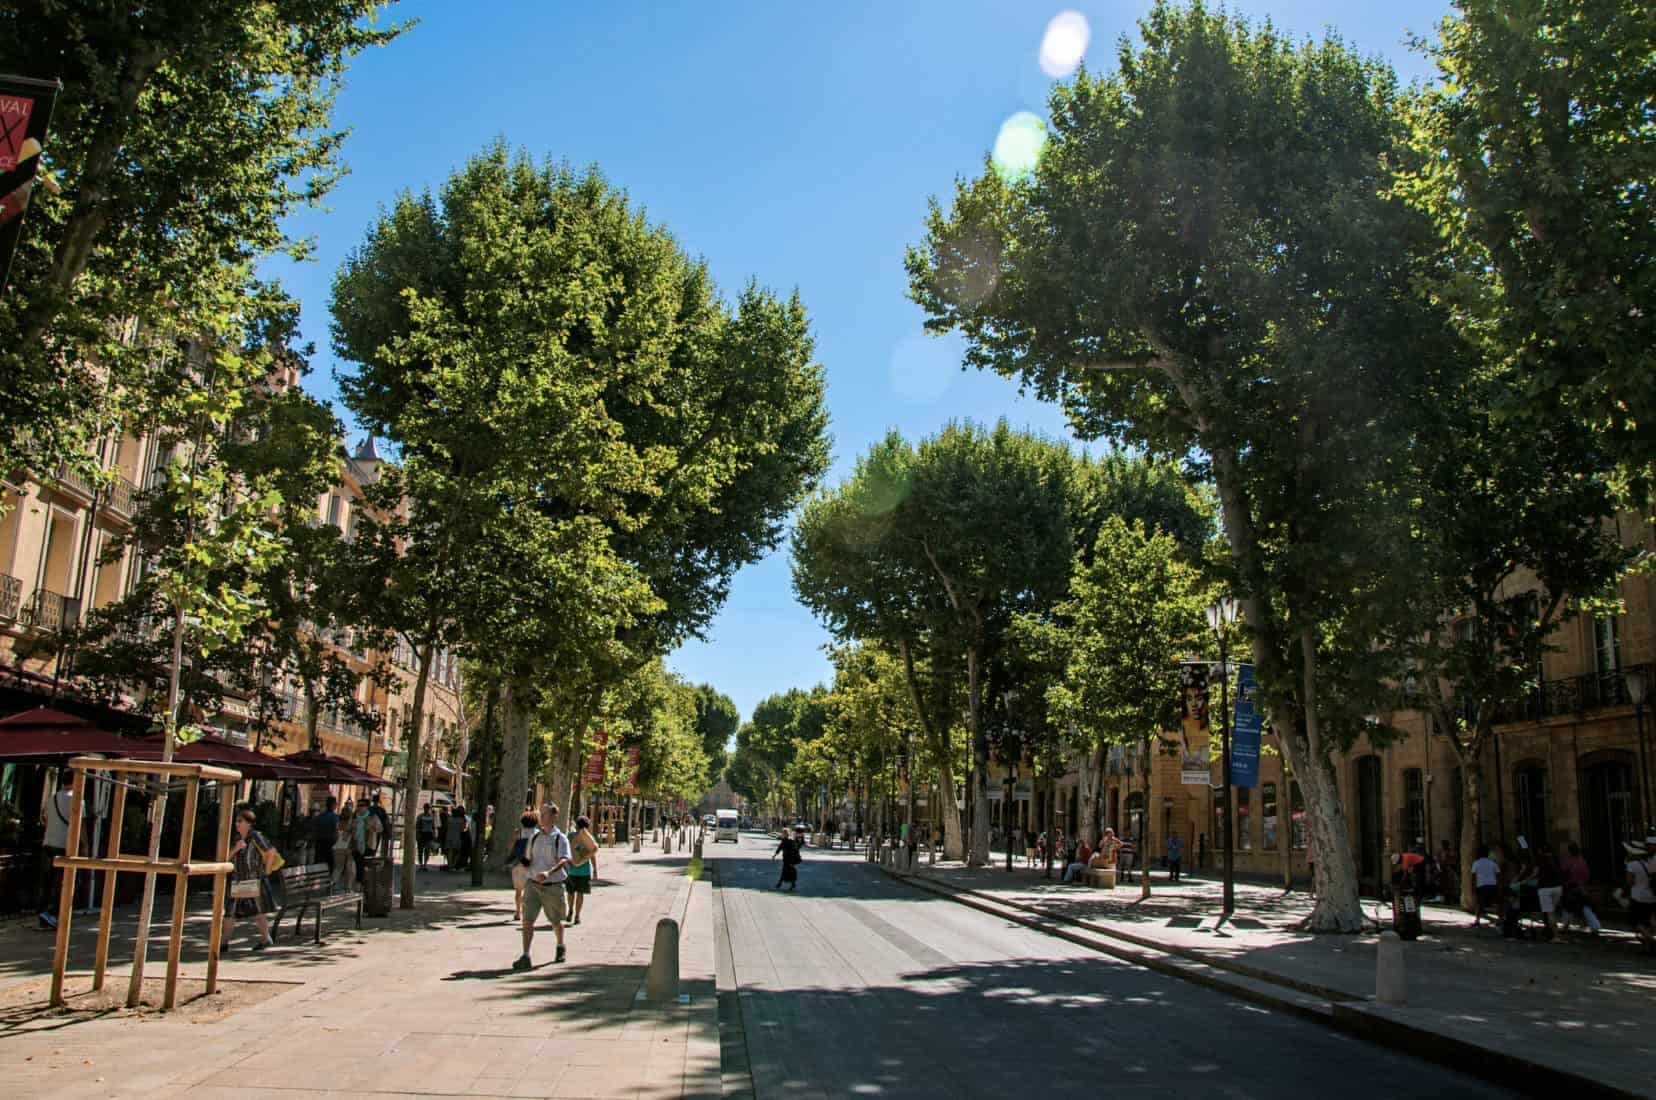 Aix-en-Provence, France - July 09, 2016. Avenue with trees and people in Aix-en-Provence, a lively town in the French countryside. In Bouches-du-Rhone department, Provence region, southeastern France